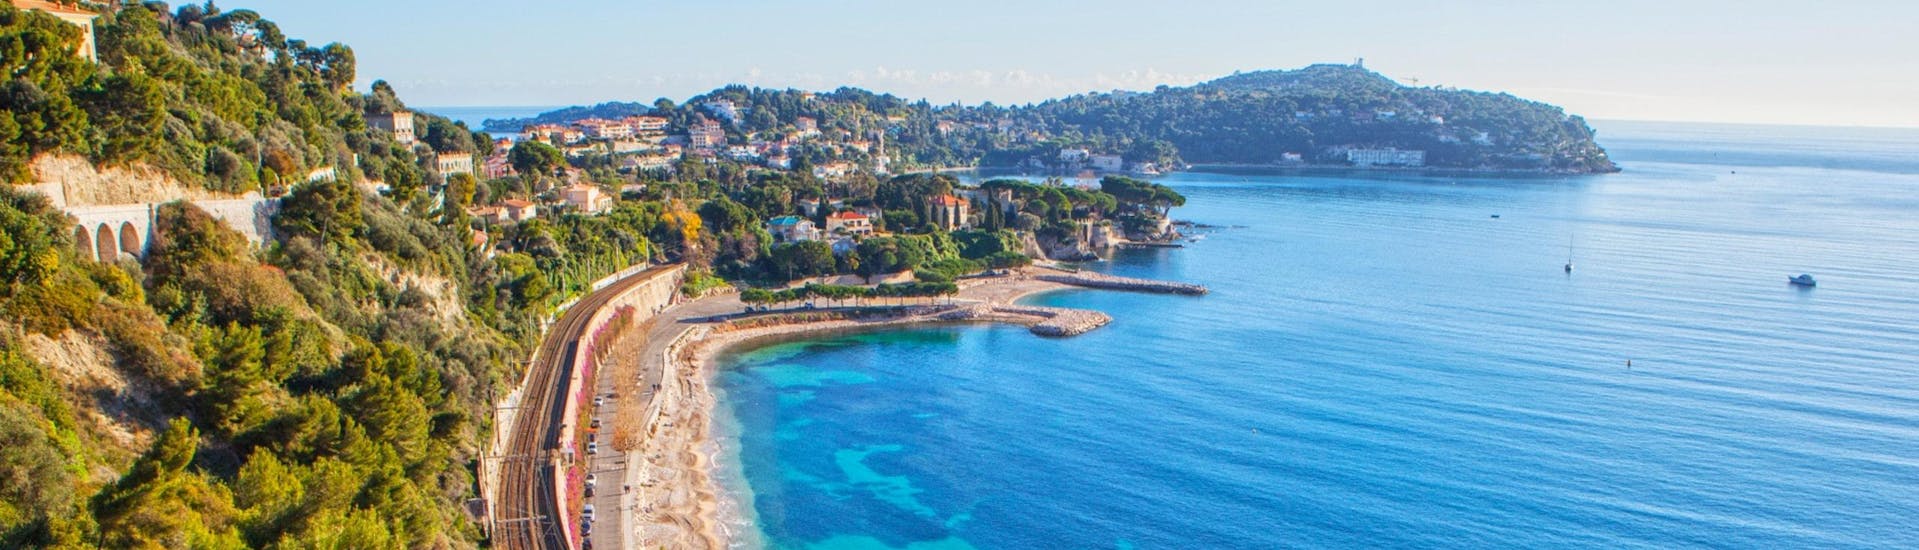 An image of the beach and the deep blue waters of the Côte d'Azur you get to see when riding a jet ski or doing other water sports activities in Antibes.